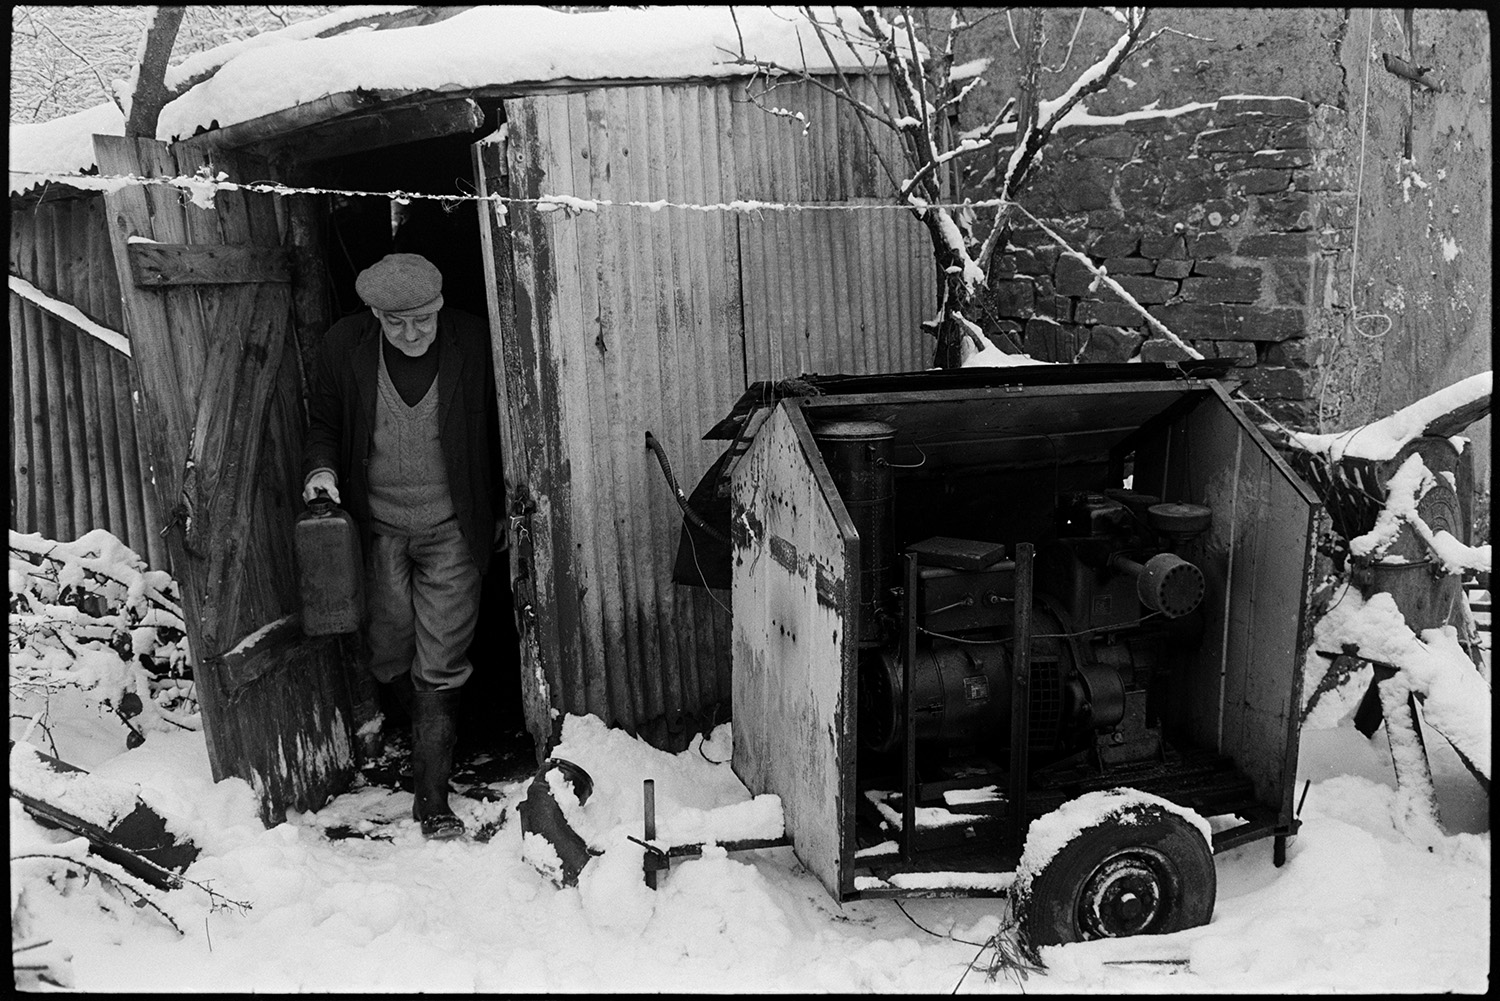 Snow, farmyard poultry, goats and dogs. Tractor and collapsing corrugated iron sheds.
[Cyril Bennett coming out of a corrugated iron shed at Cuppers Piece, Beaford carrying a can of fuel for the generator which is standing outside. The farmyard and shed is covered with snow.]